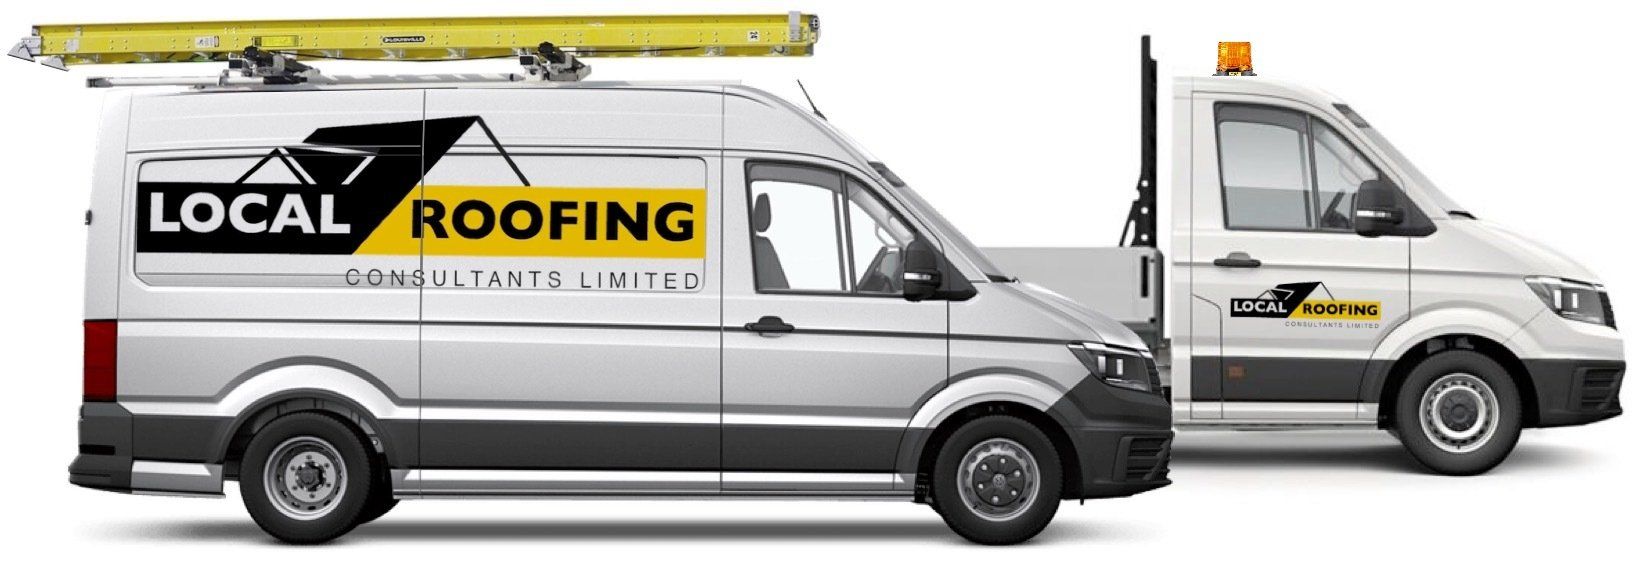 Local Roofing Consultants Limited work in Wimbledon and throughout the London area